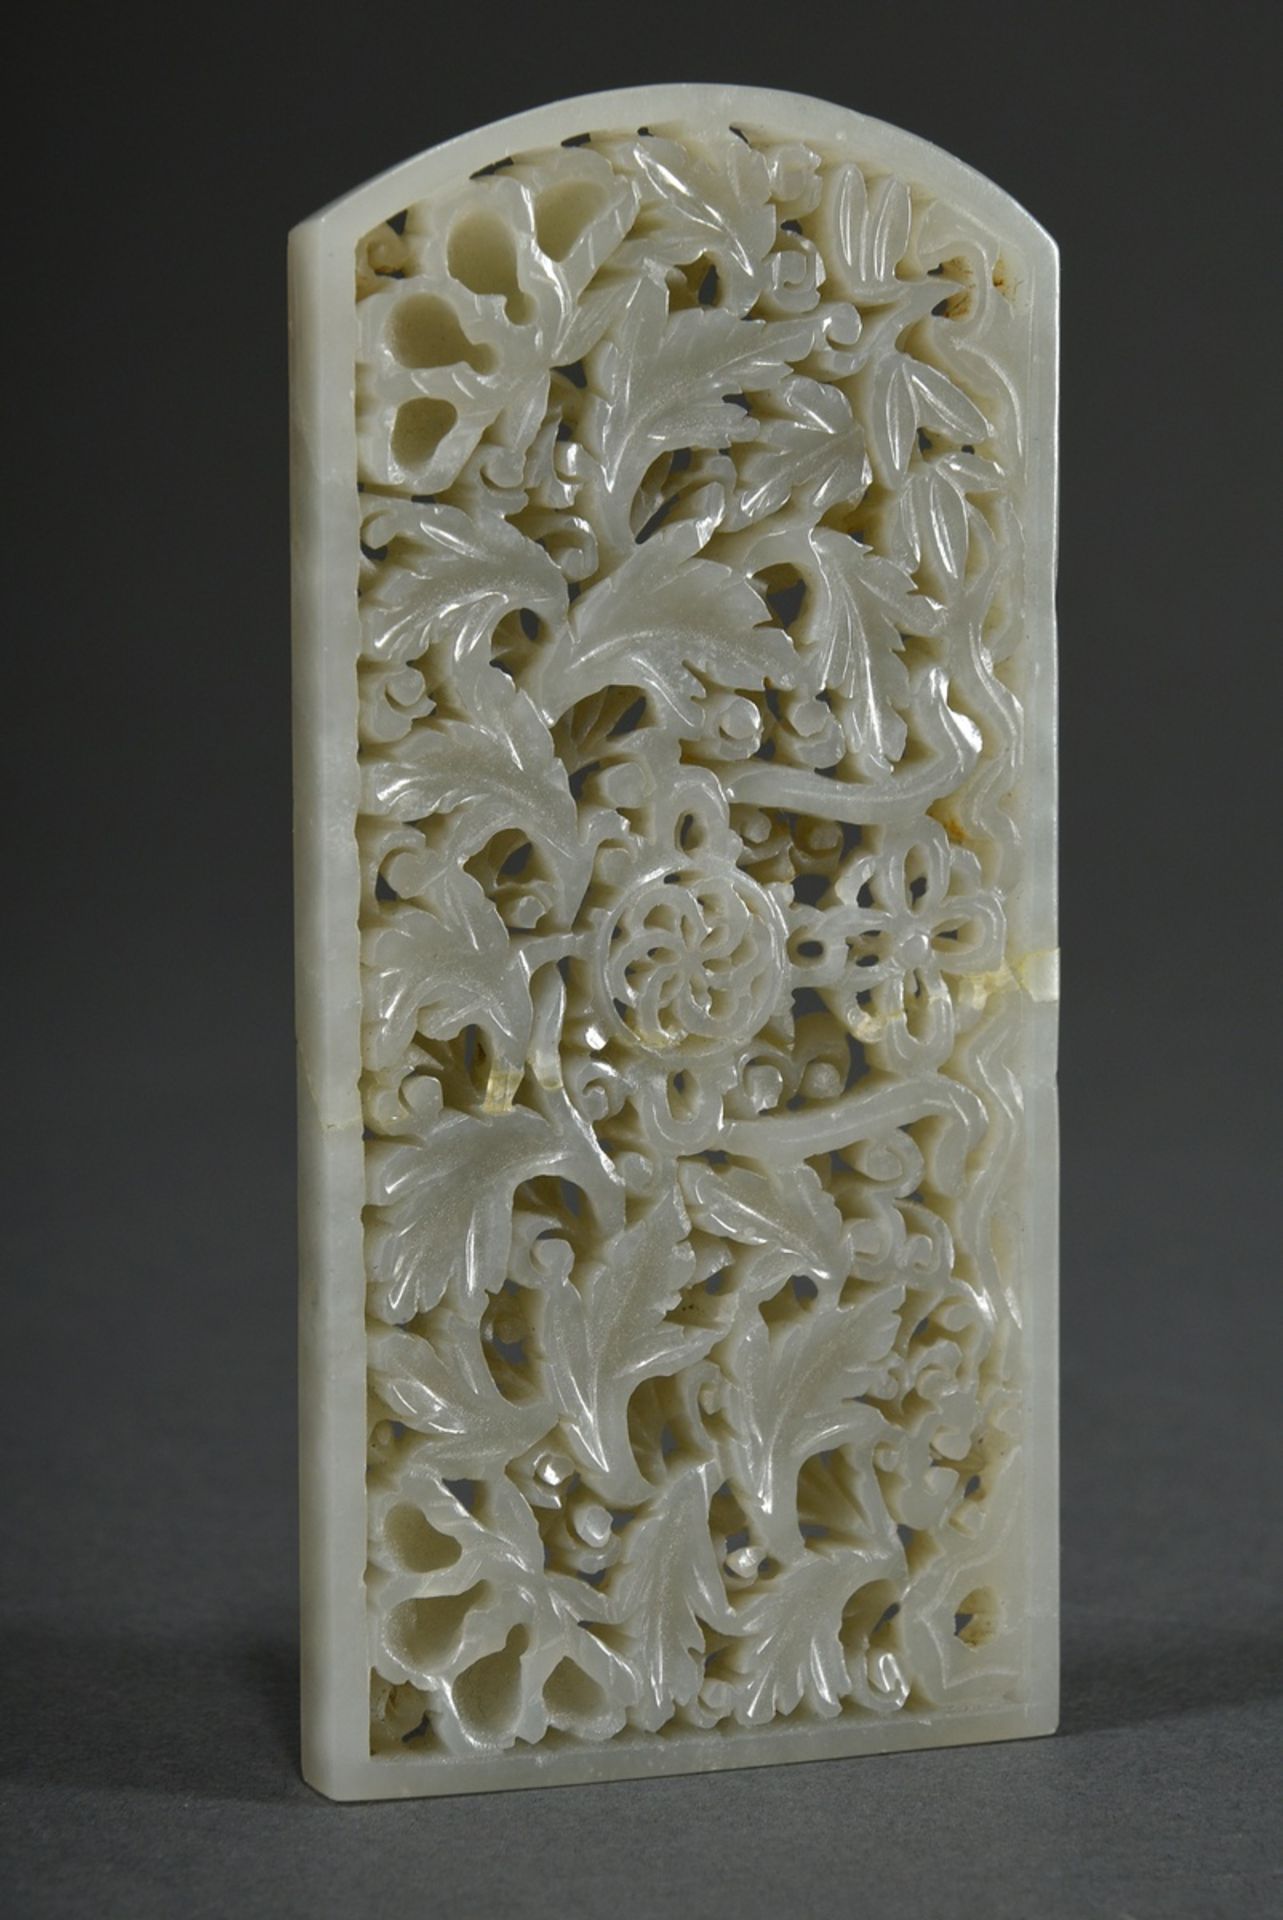 Light filigree openwork jade plaque "Floral Tendrils" in Ming style, wooden base, 11,7x5,4cm, 2 sma